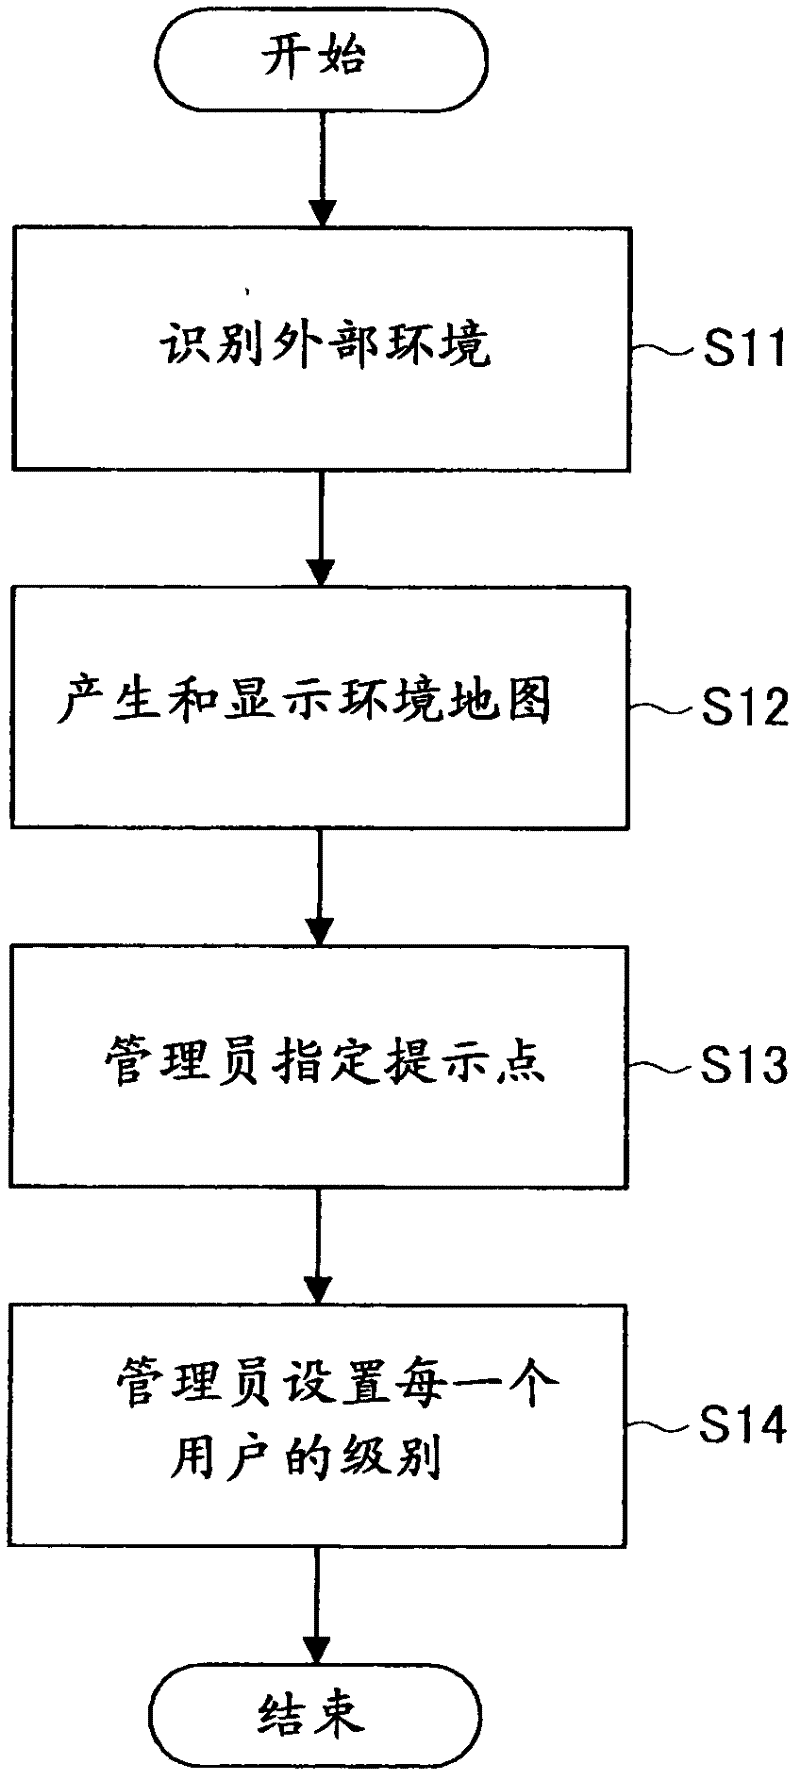 Robot apparatus, information providing method carried out by the robot apparatus and computer storage media